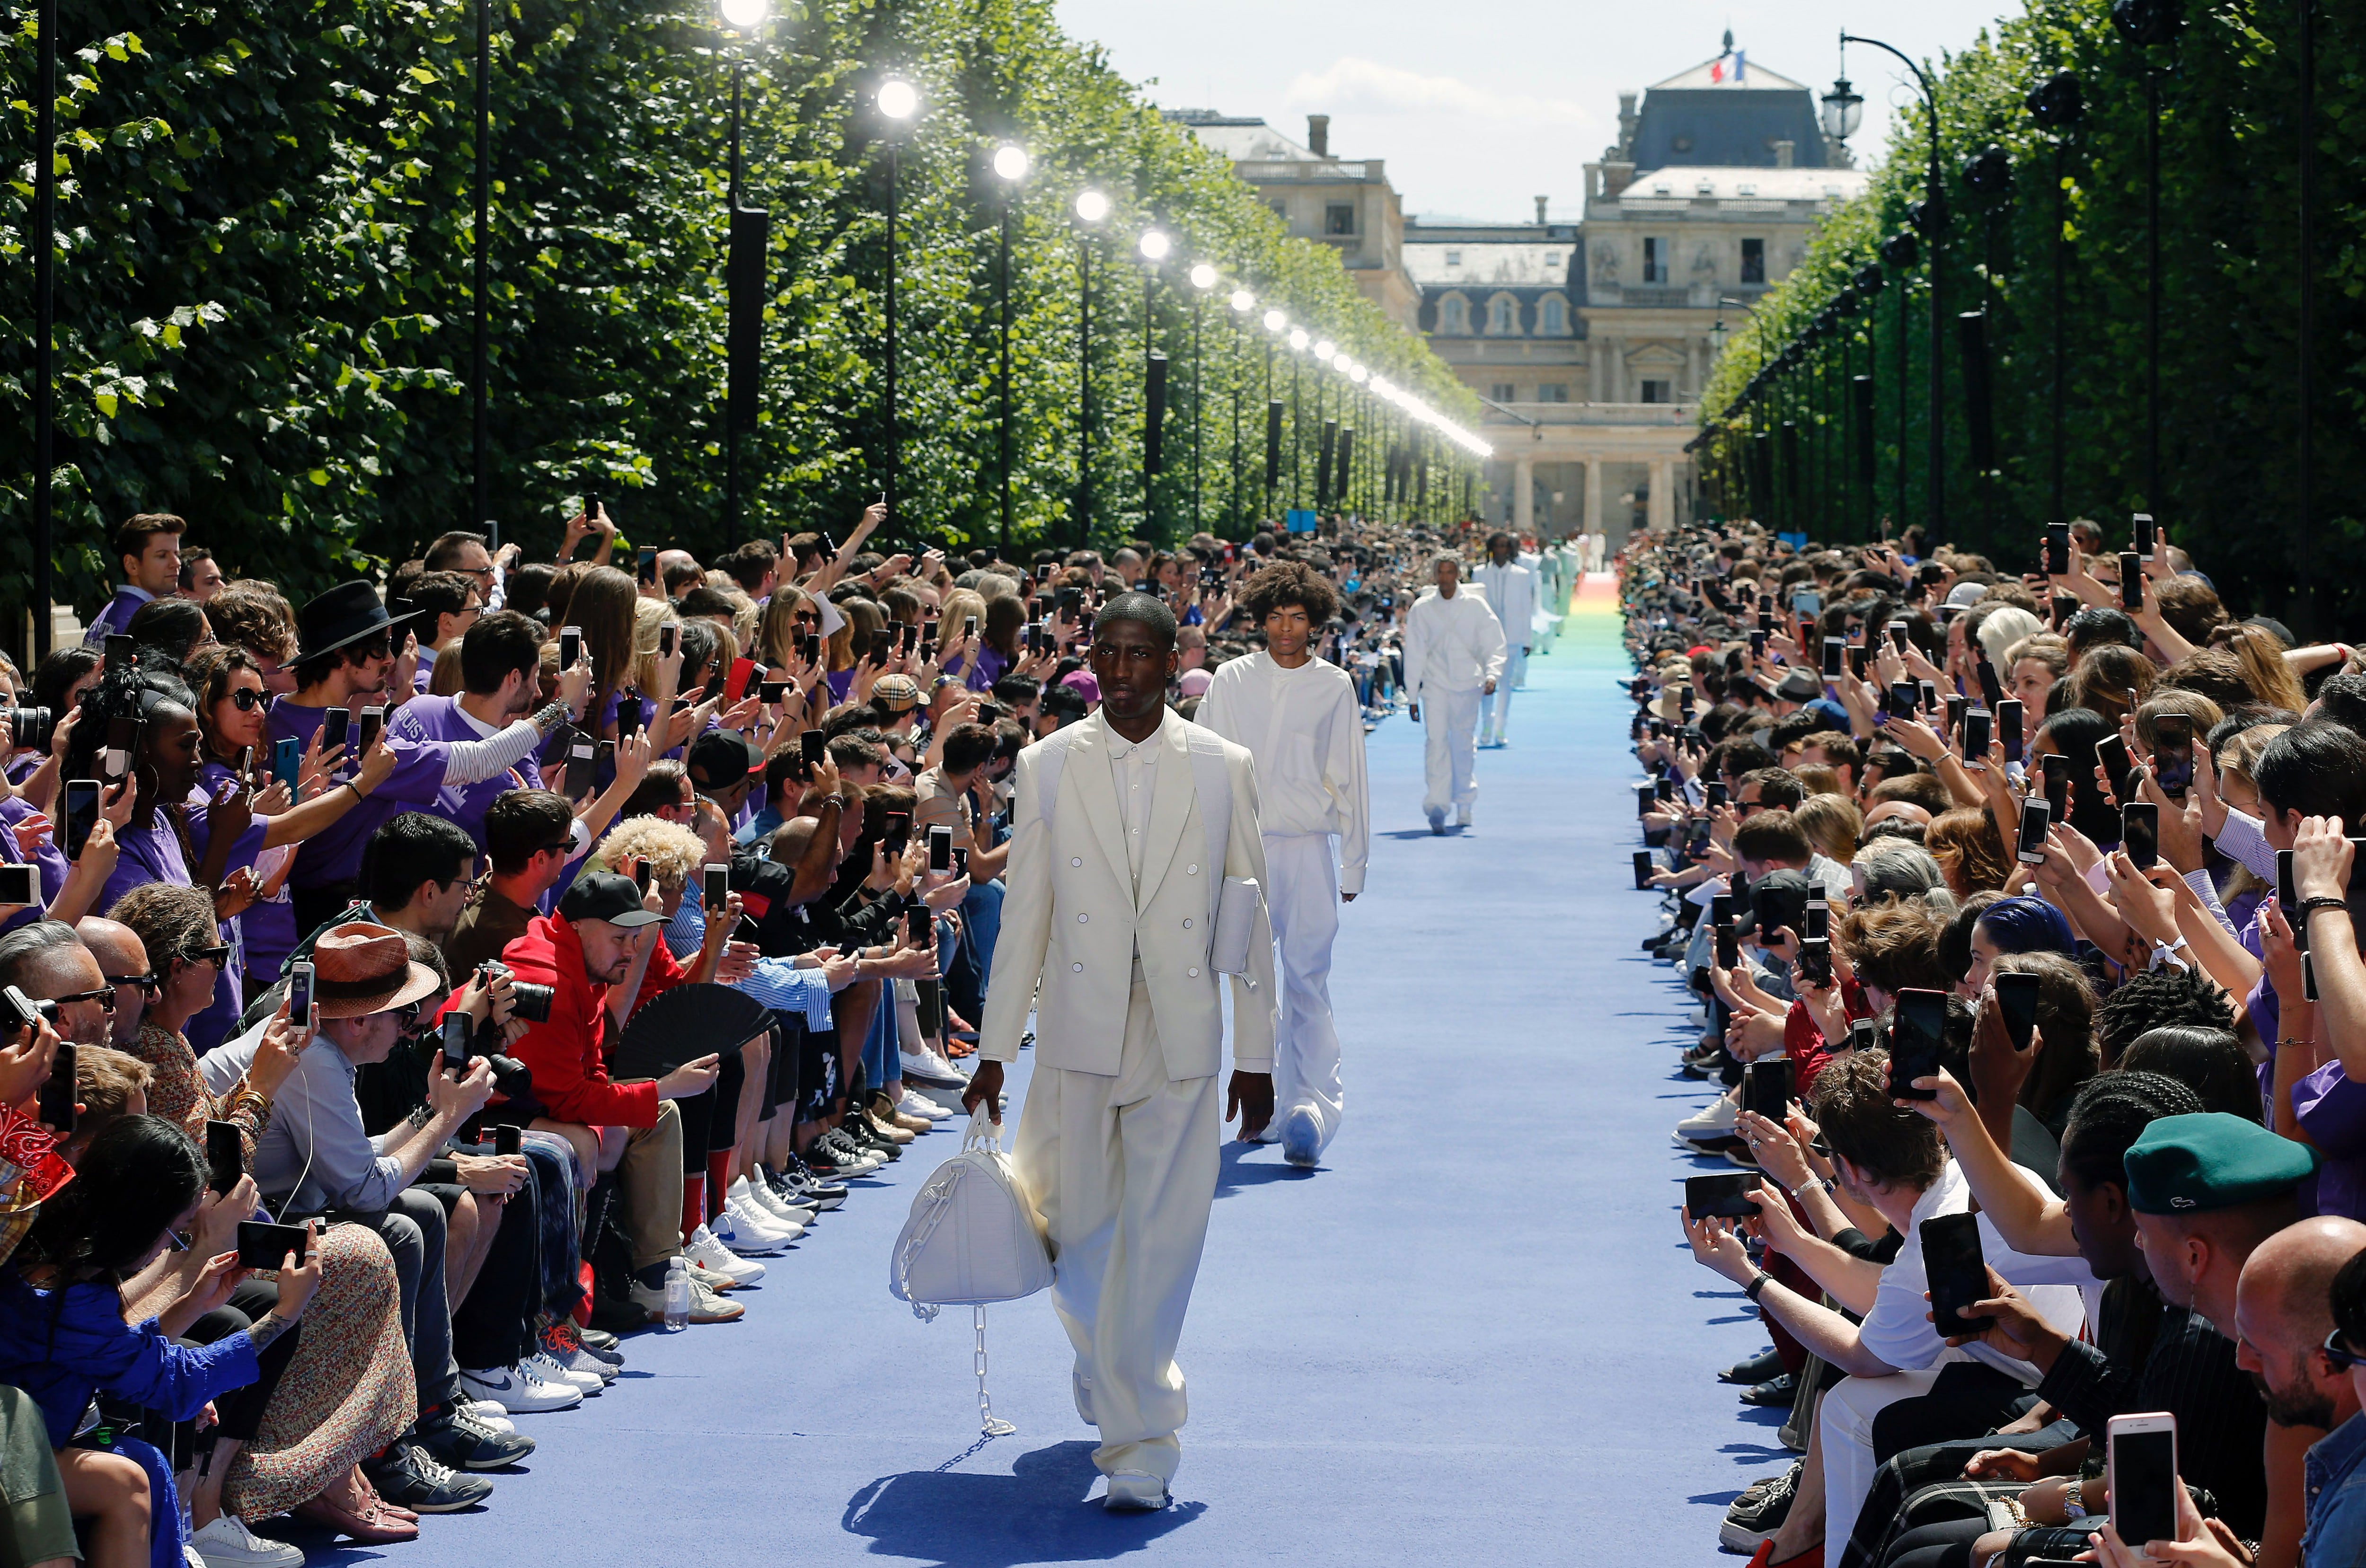 Louis Vuitton creates clothes for the modern elite, closing one of the most  extraordinary fashion months in years